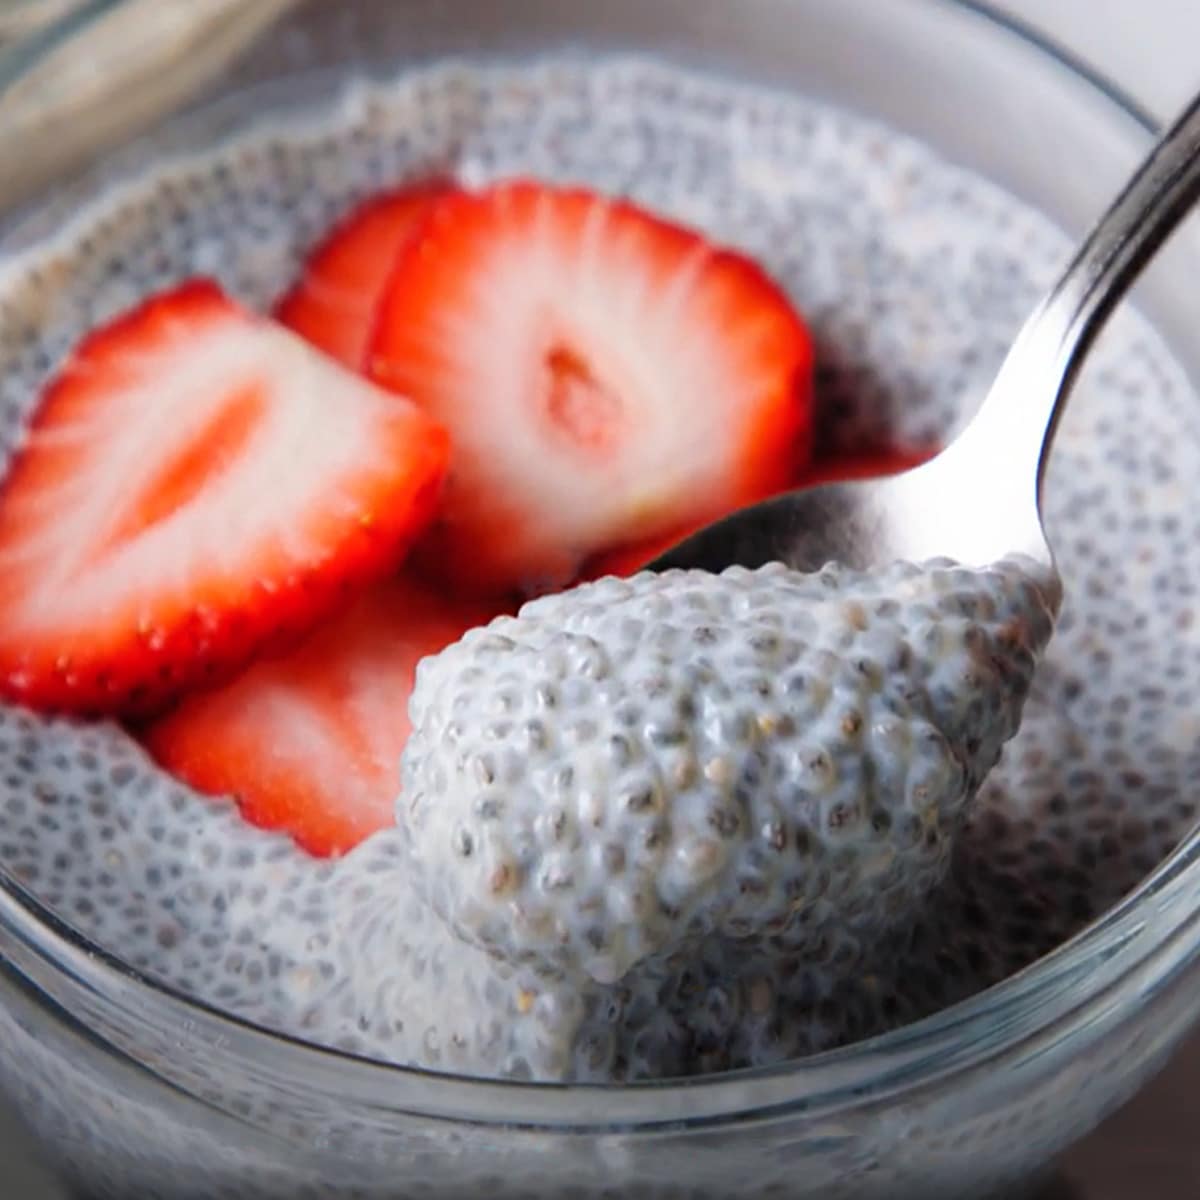 9 Vegan Ways to Make Chia Seeds Part of Your Diet